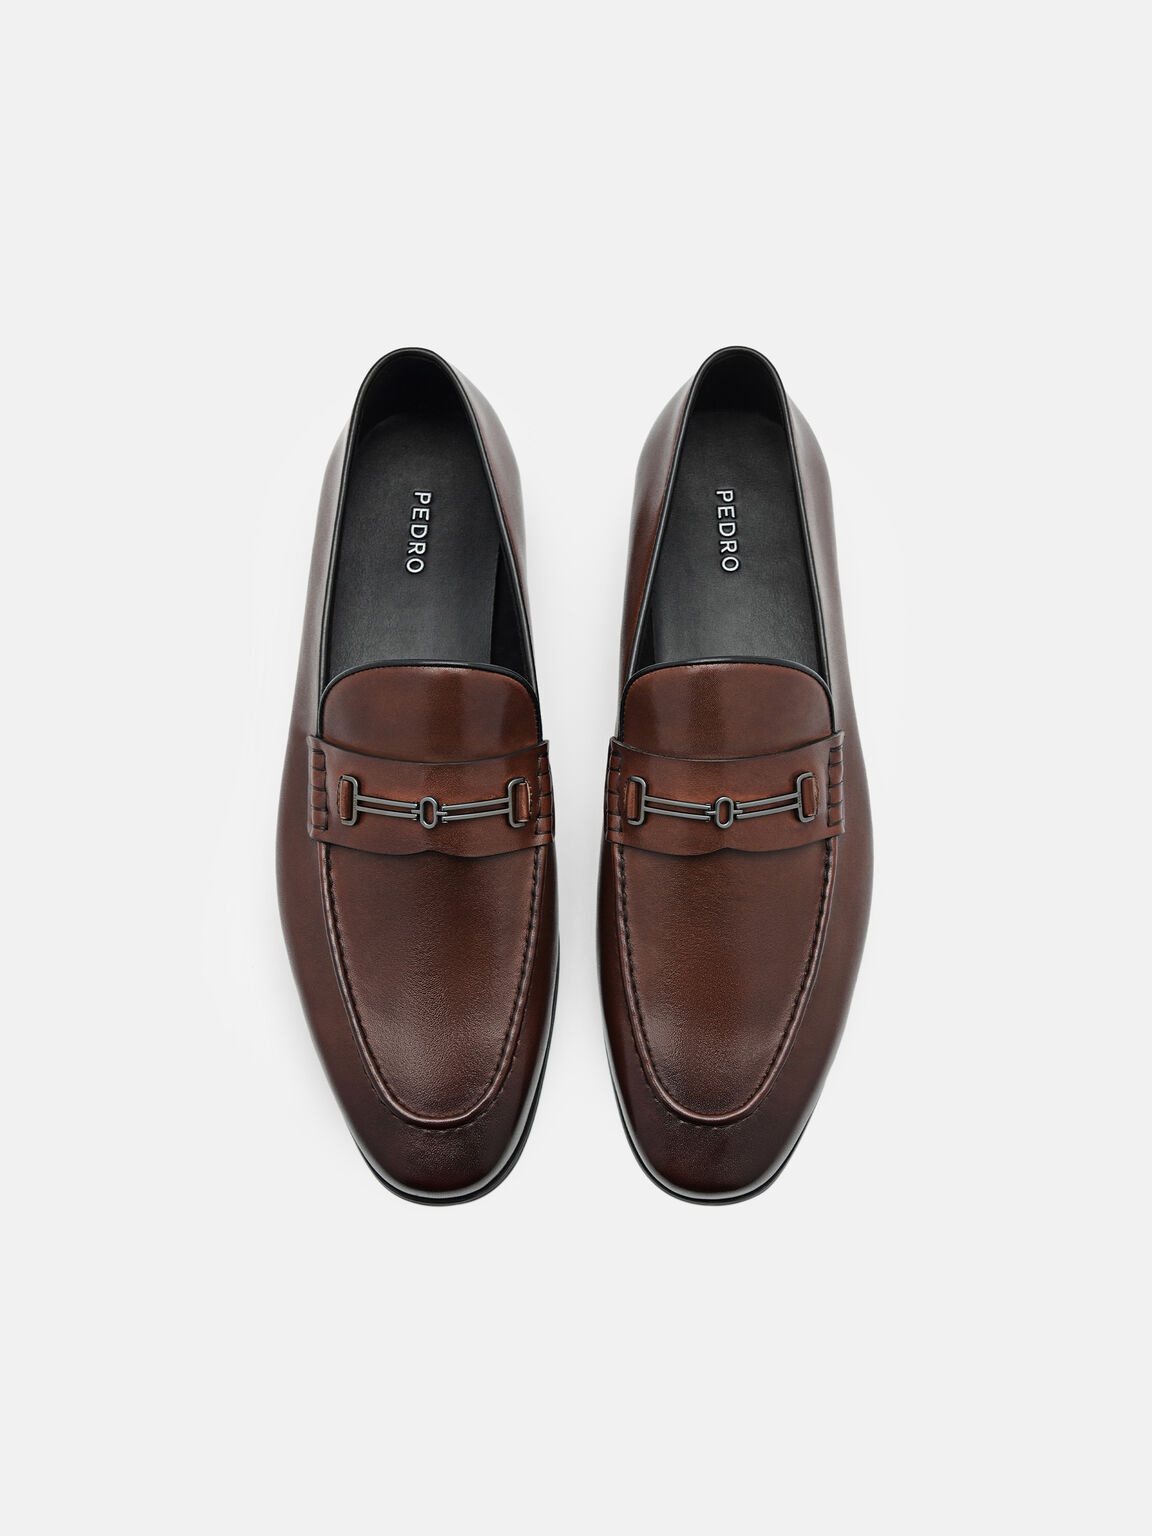 Brown Anthony Leather Loafers - PEDRO International